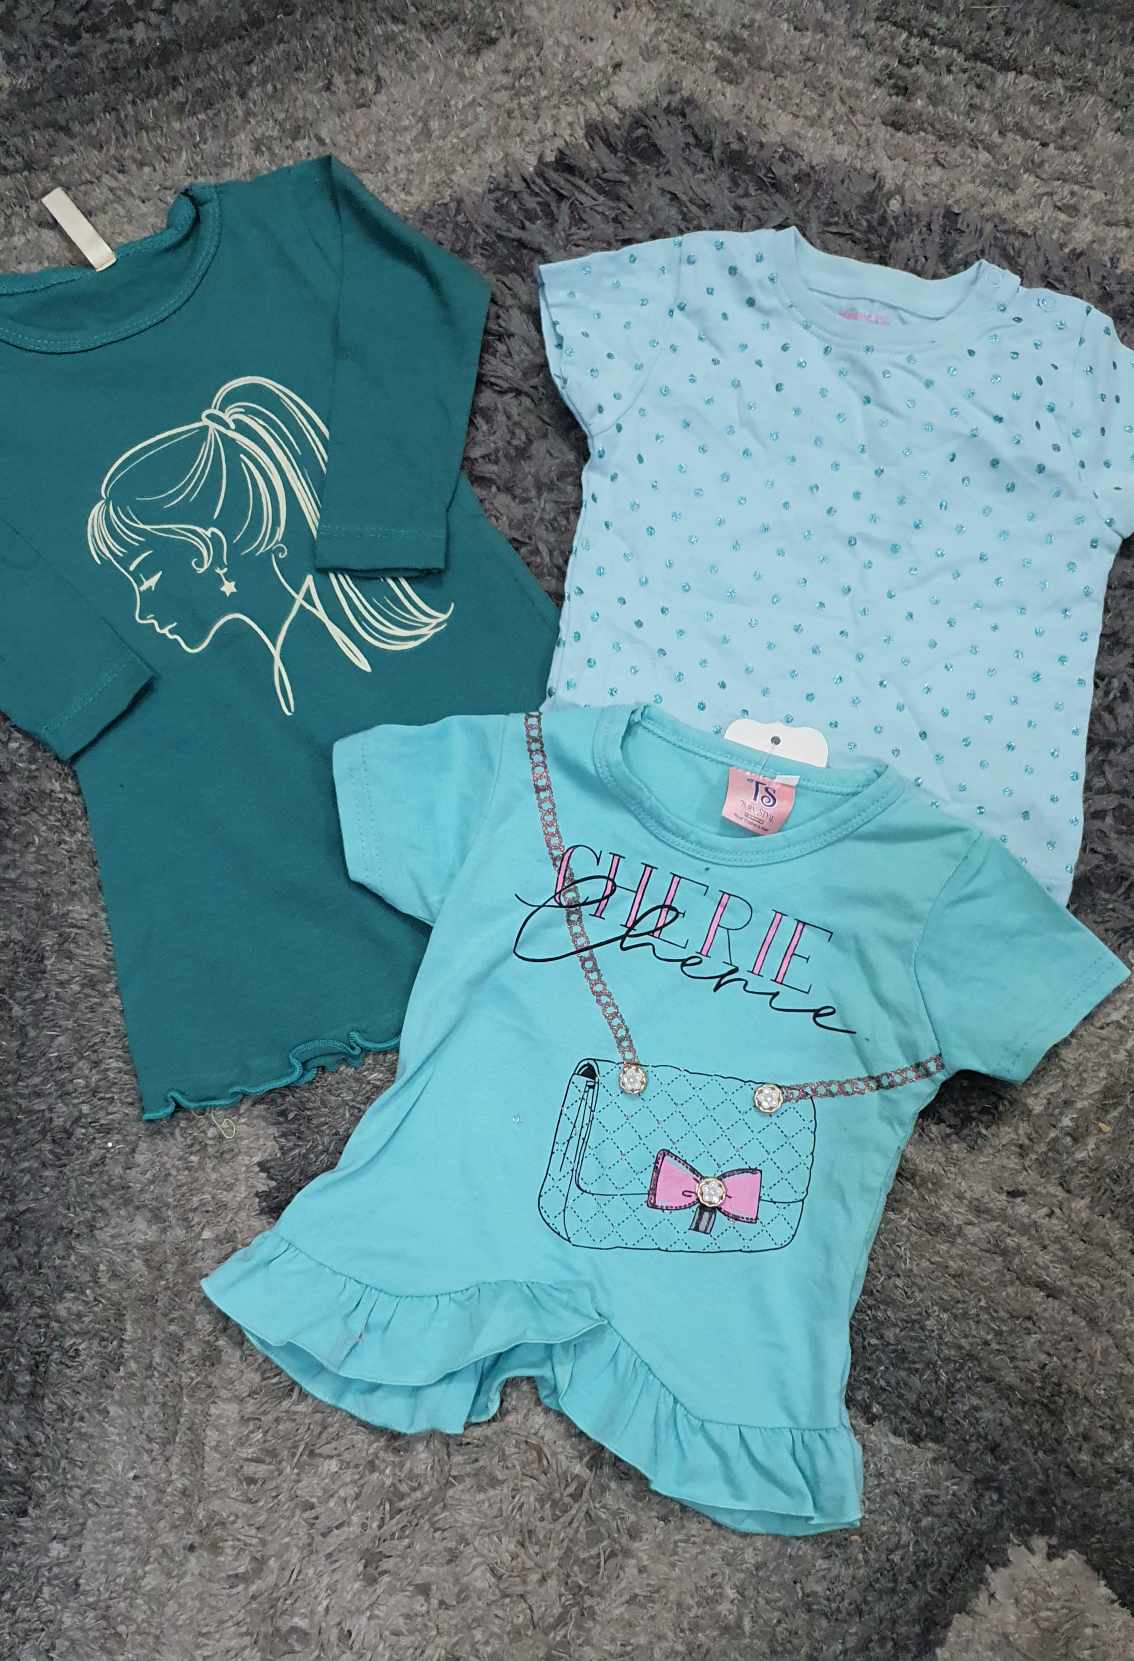 Kids Infant Girls Summer Pack of 3: 6-9 Months, One Shirt and 2 Frocks